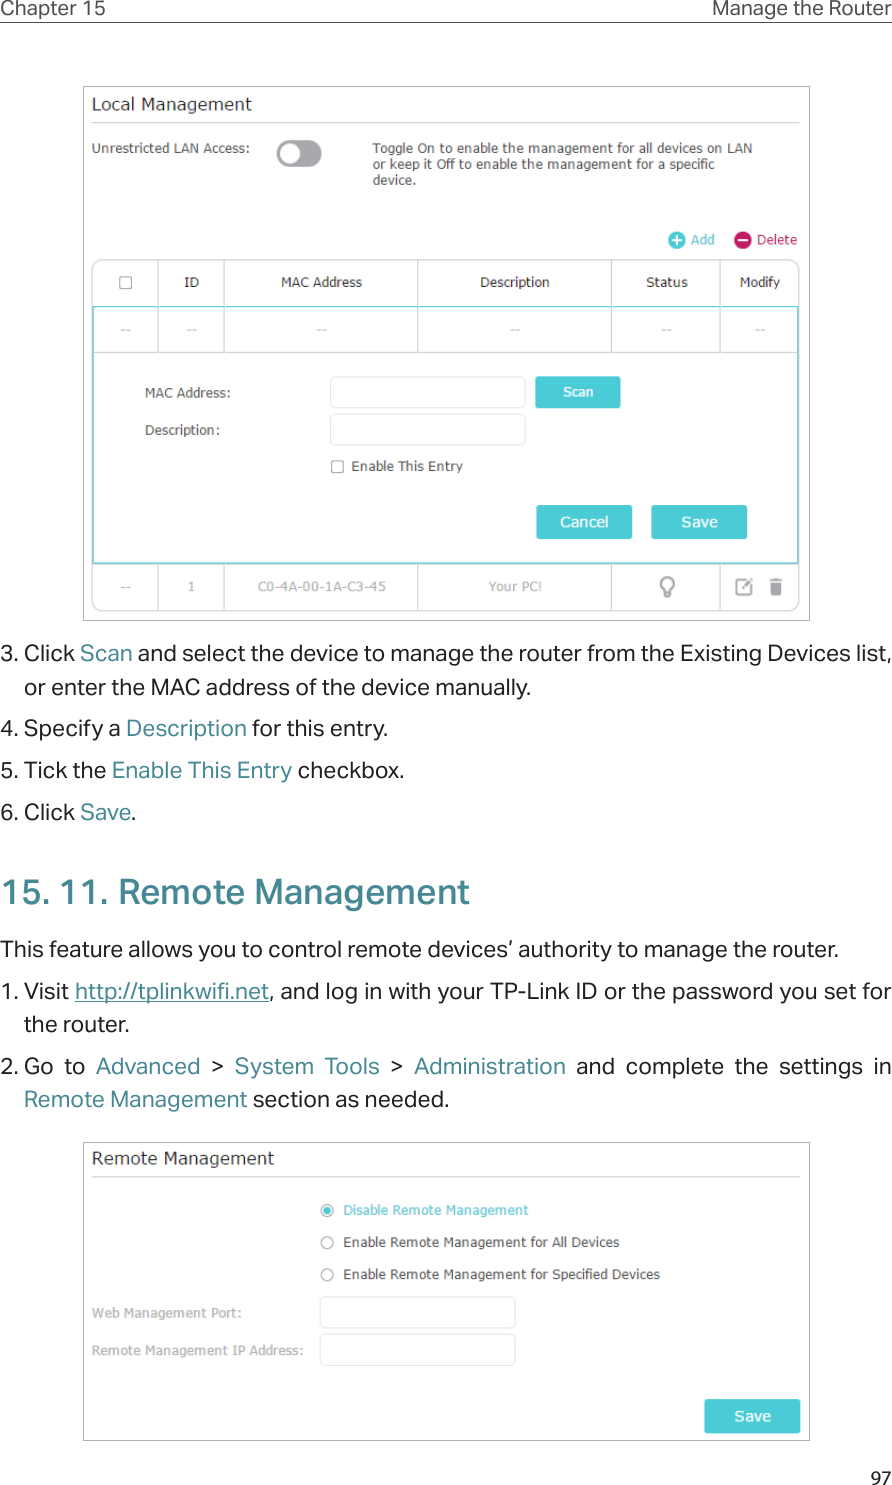 97Chapter 15 Manage the Router 3. Click Scan and select the device to manage the router from the Existing Devices list, or enter the MAC address of the device manually.4. Specify a Description for this entry.5. Tick the Enable This Entry checkbox.6. Click Save.15. 11. Remote ManagementThis feature allows you to control remote devices’ authority to manage the router.1. Visit http://tplinkwifi.net, and log in with your TP-Link ID or the password you set for the router.2. Go to Advanced &gt; System Tools &gt;  Administration and complete the settings in Remote Management section as needed.